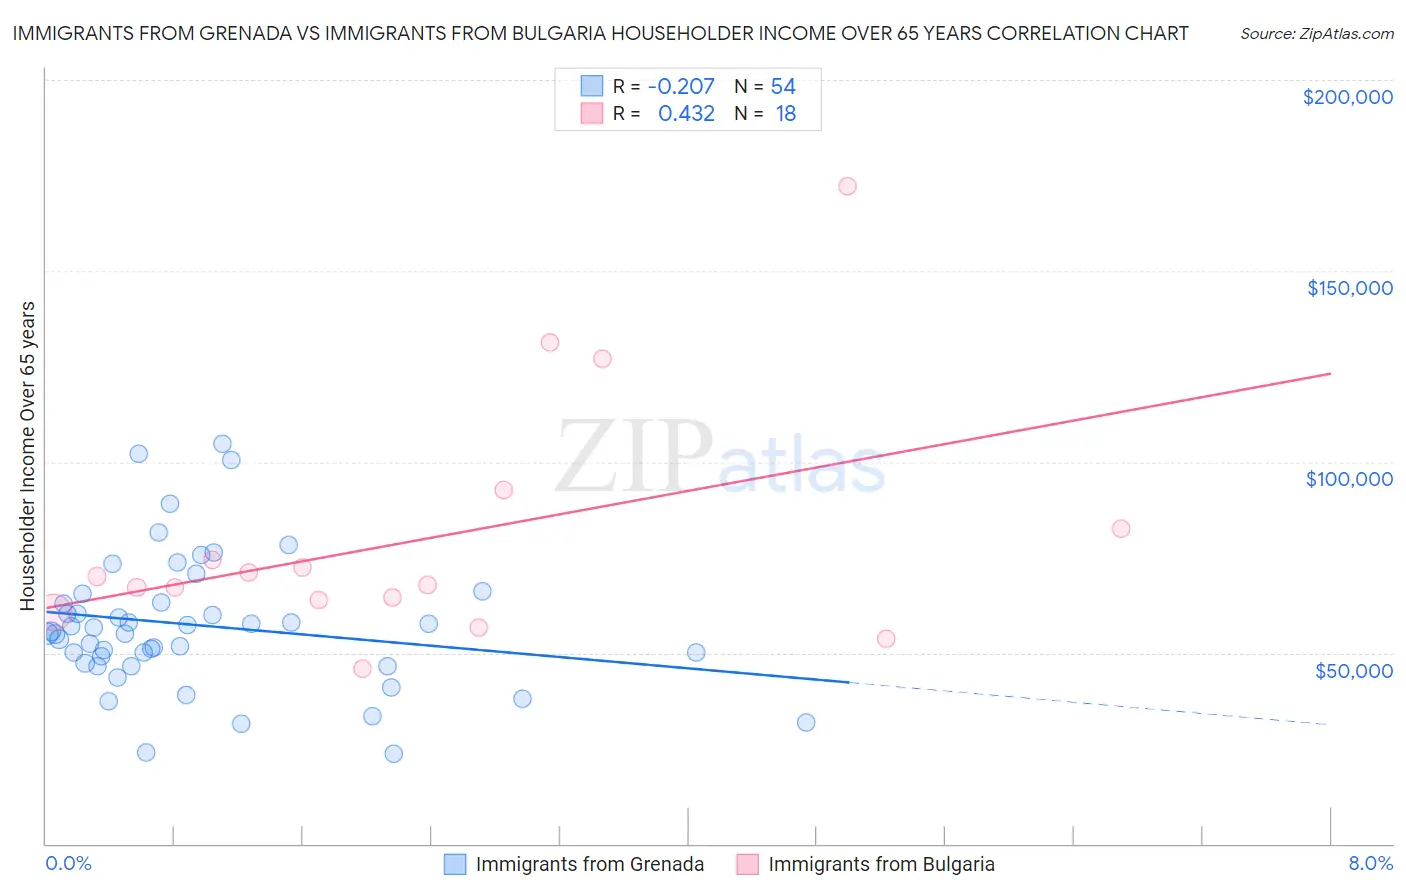 Immigrants from Grenada vs Immigrants from Bulgaria Householder Income Over 65 years